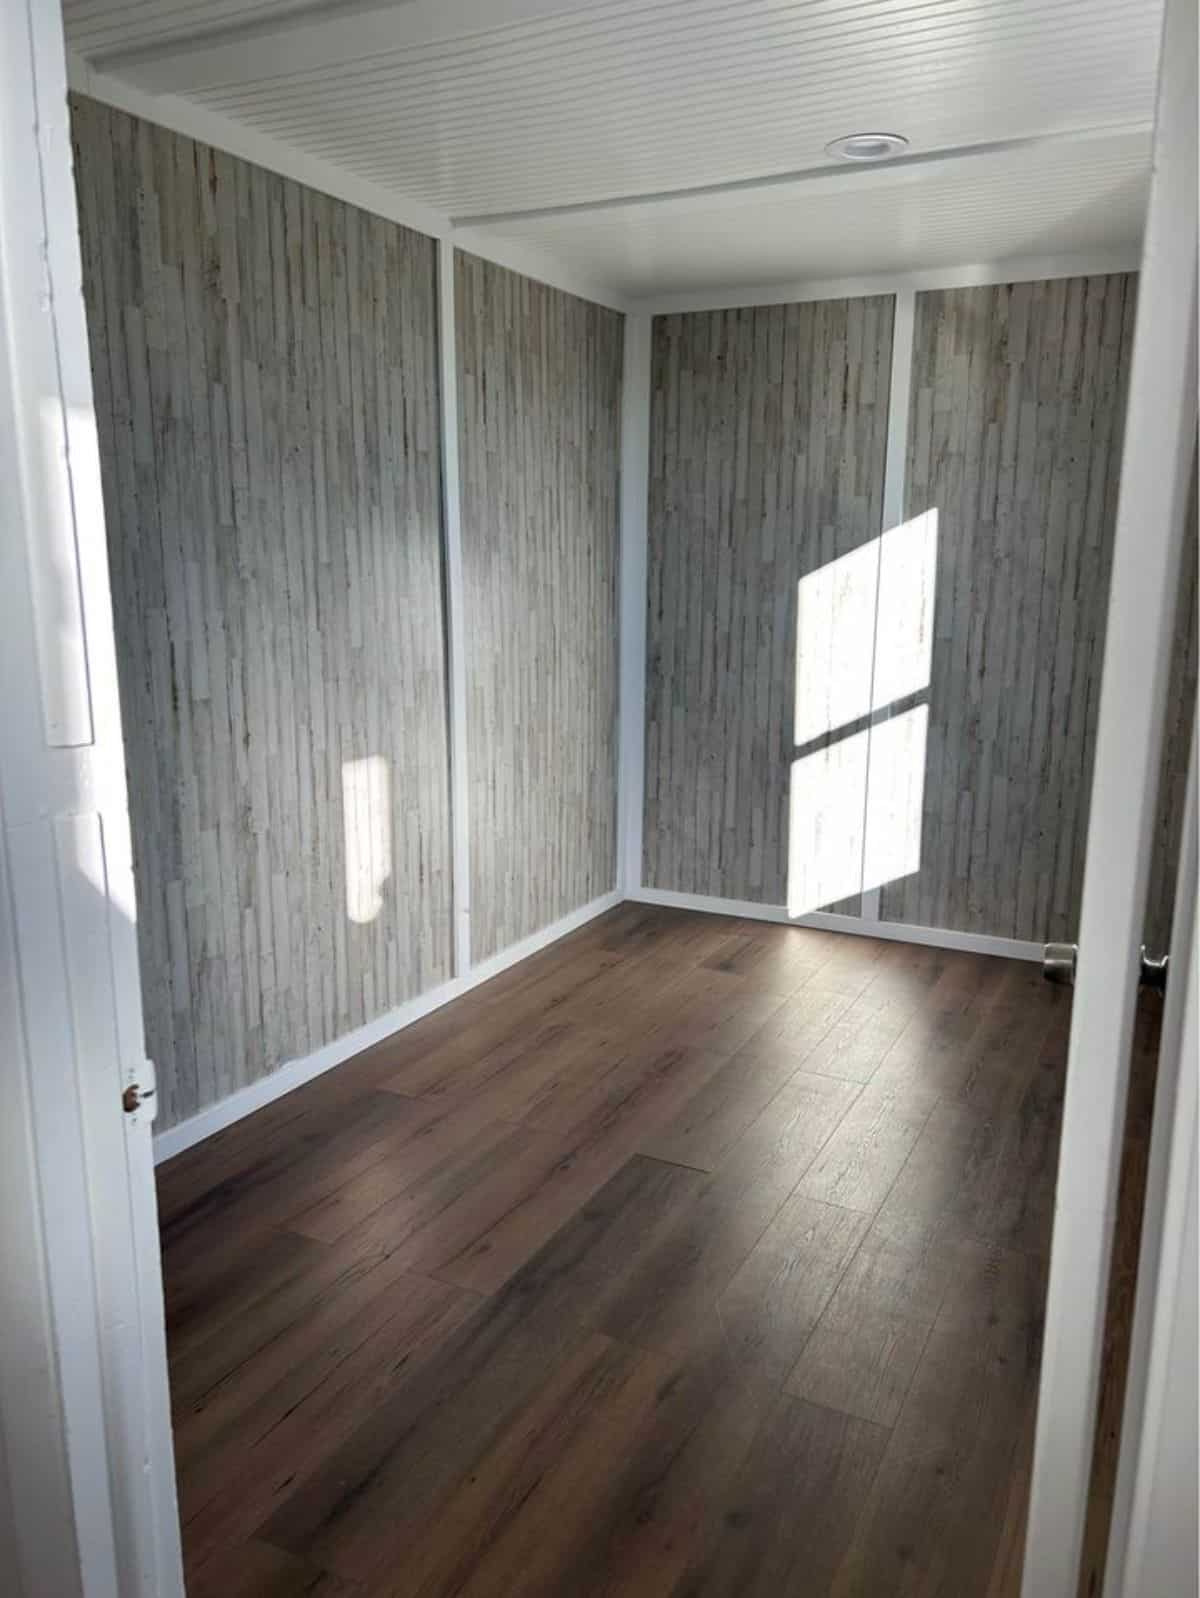 huge bedroom space can accommodate queen bed with wardrobe